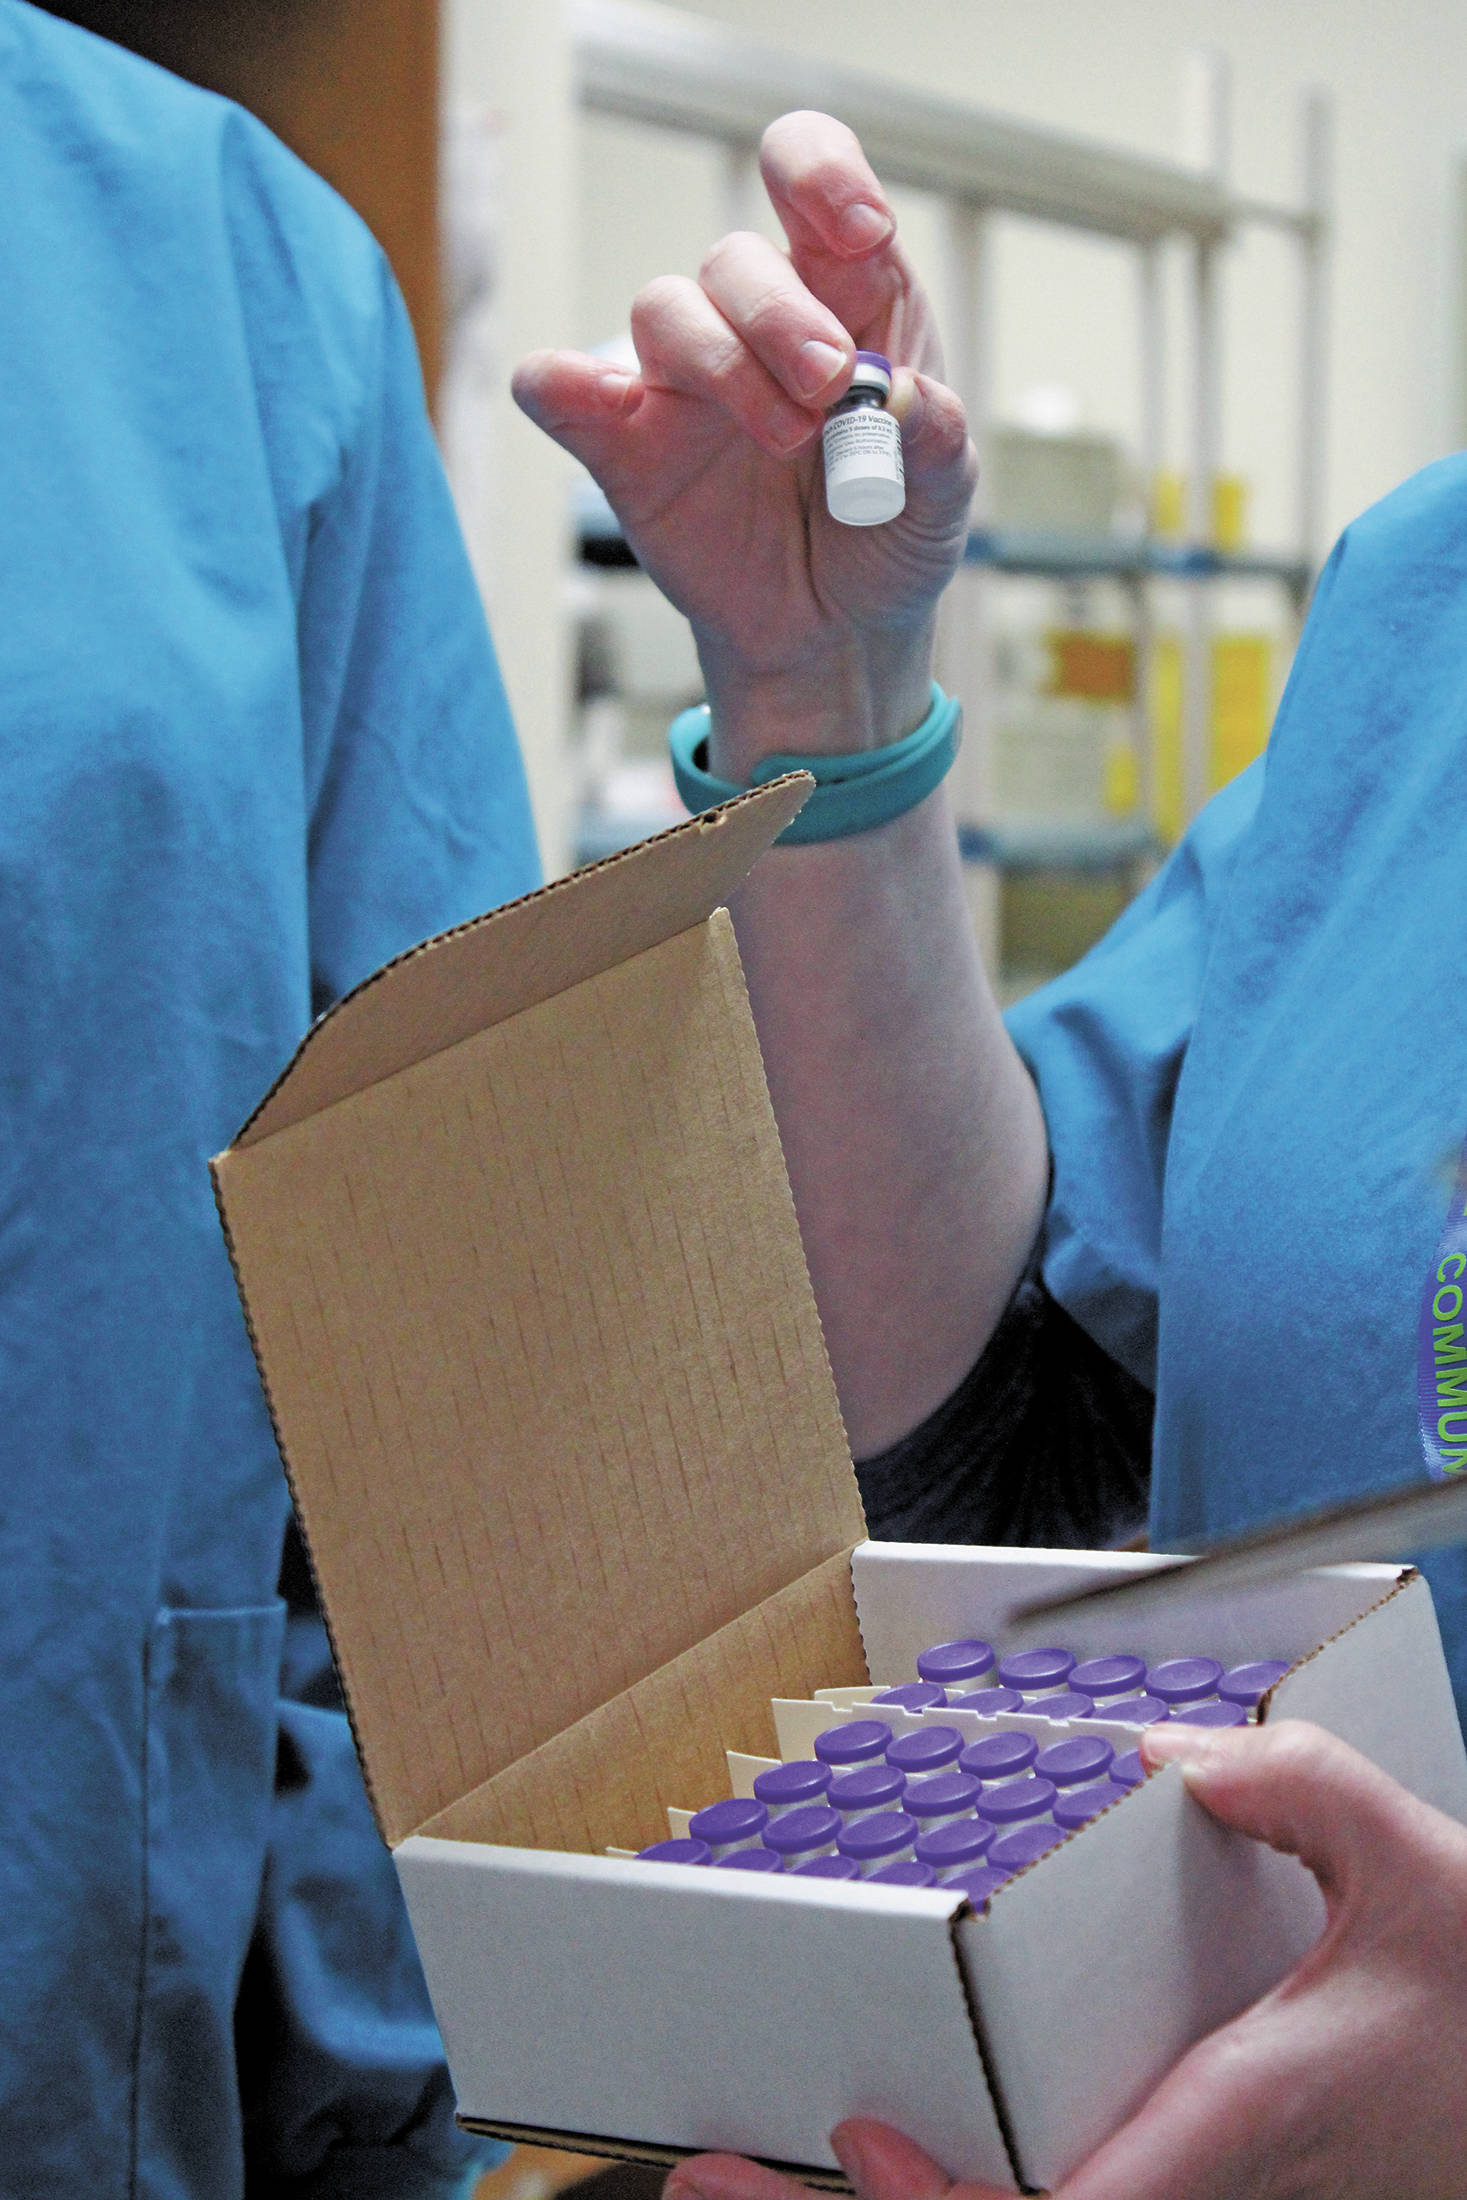 The Pfizer vaccine for COVID-19 shortly after it arrived at the South Peninsula Hospital on Wednesday, Dec. 16, 2020 in Homer, Alaska. (Photo by Megan Pacer/Homer News)